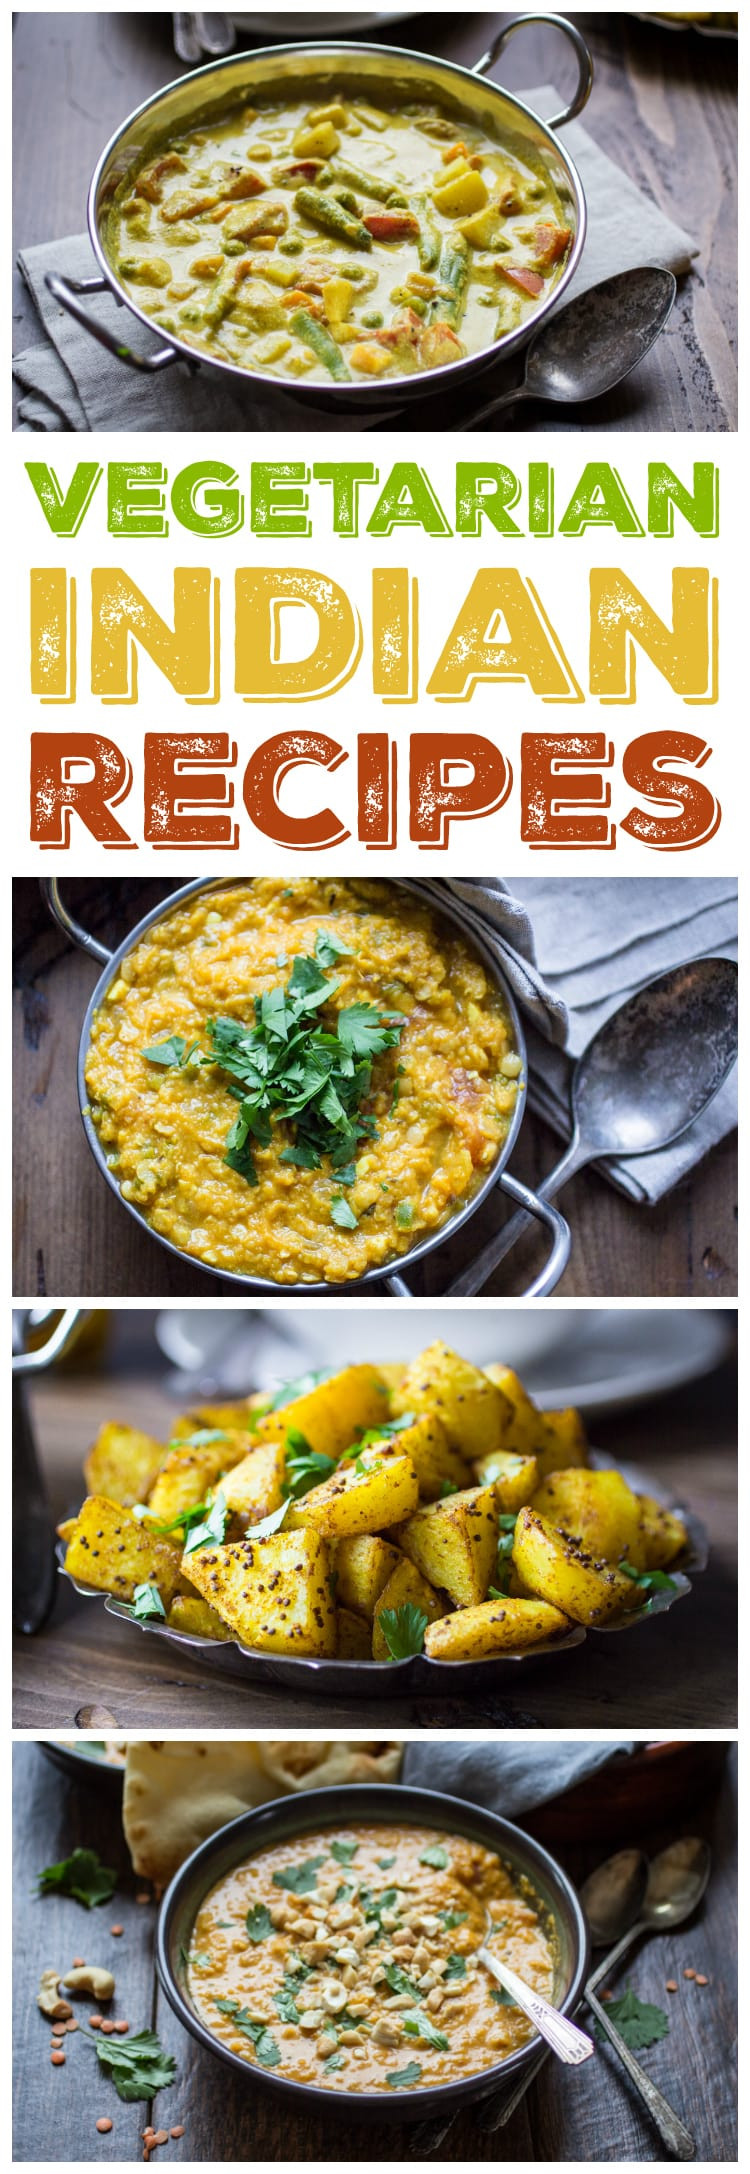 Vegan Indian Recipes
 10 Ve arian Indian Recipes to Make Again and Again The